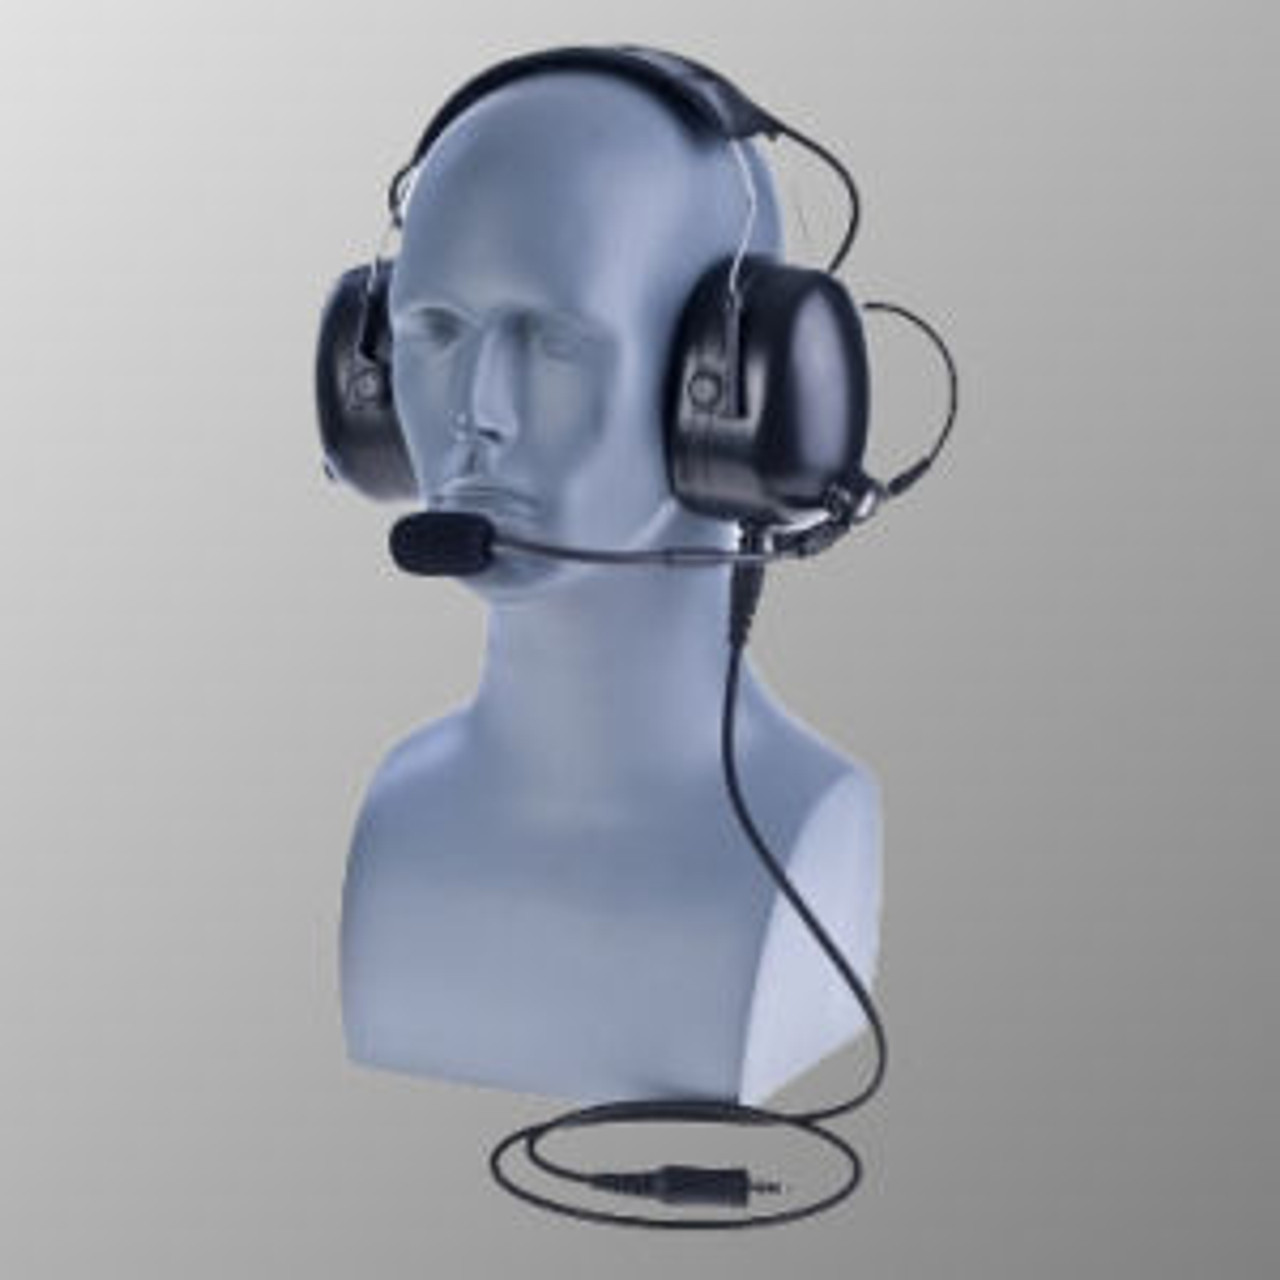 Relm RPV3600 Over The Head Double Muff Headset